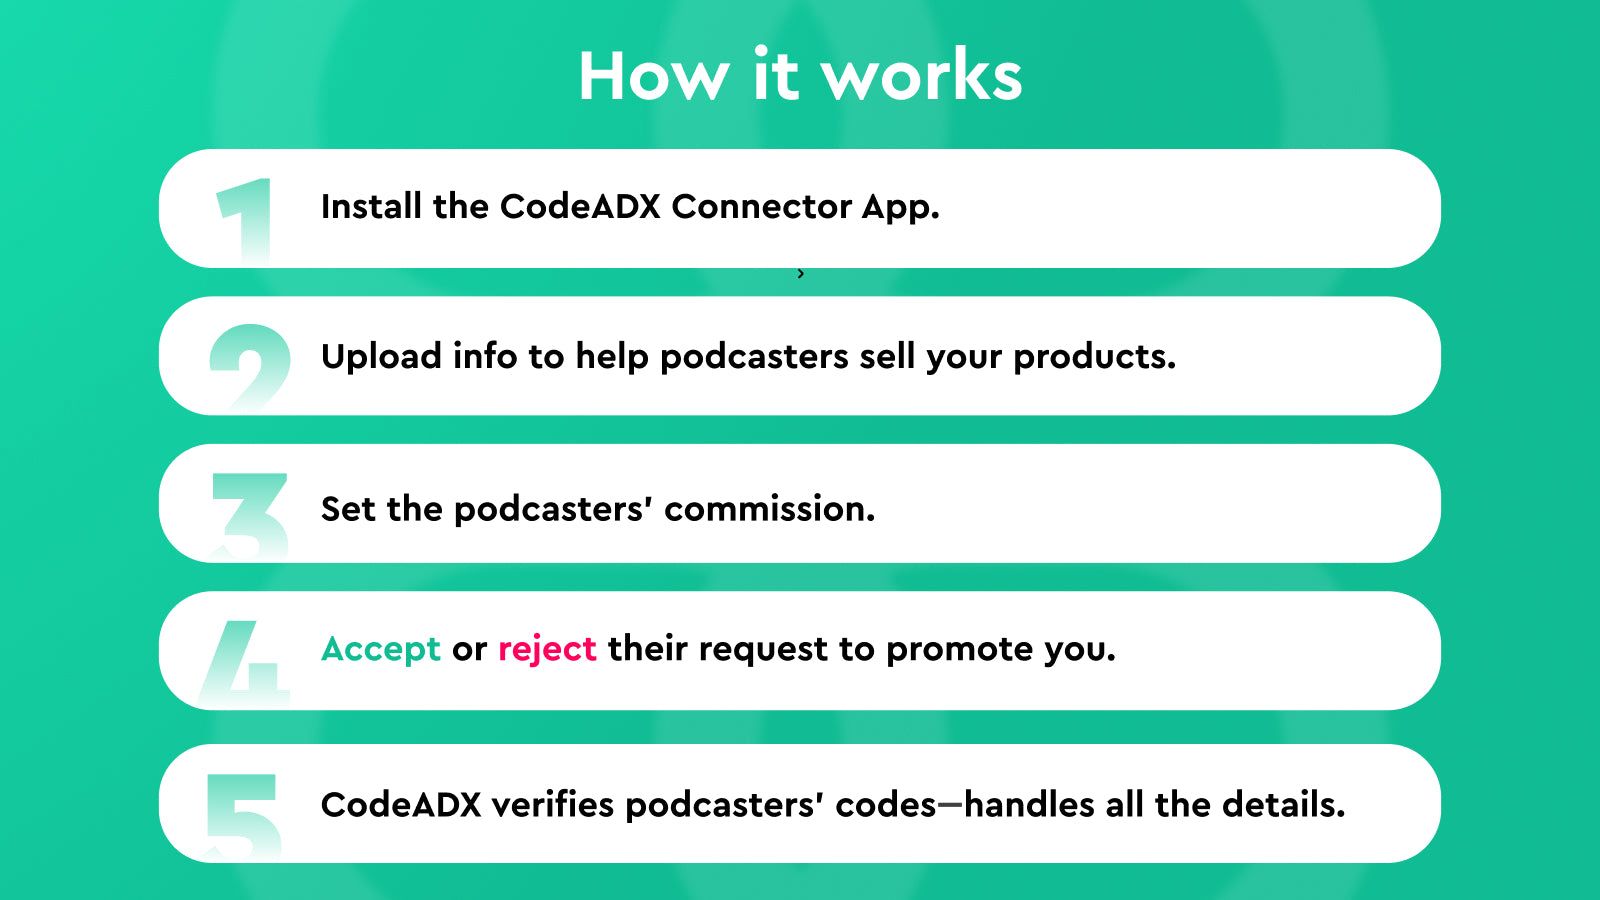 CodeADX: How it works